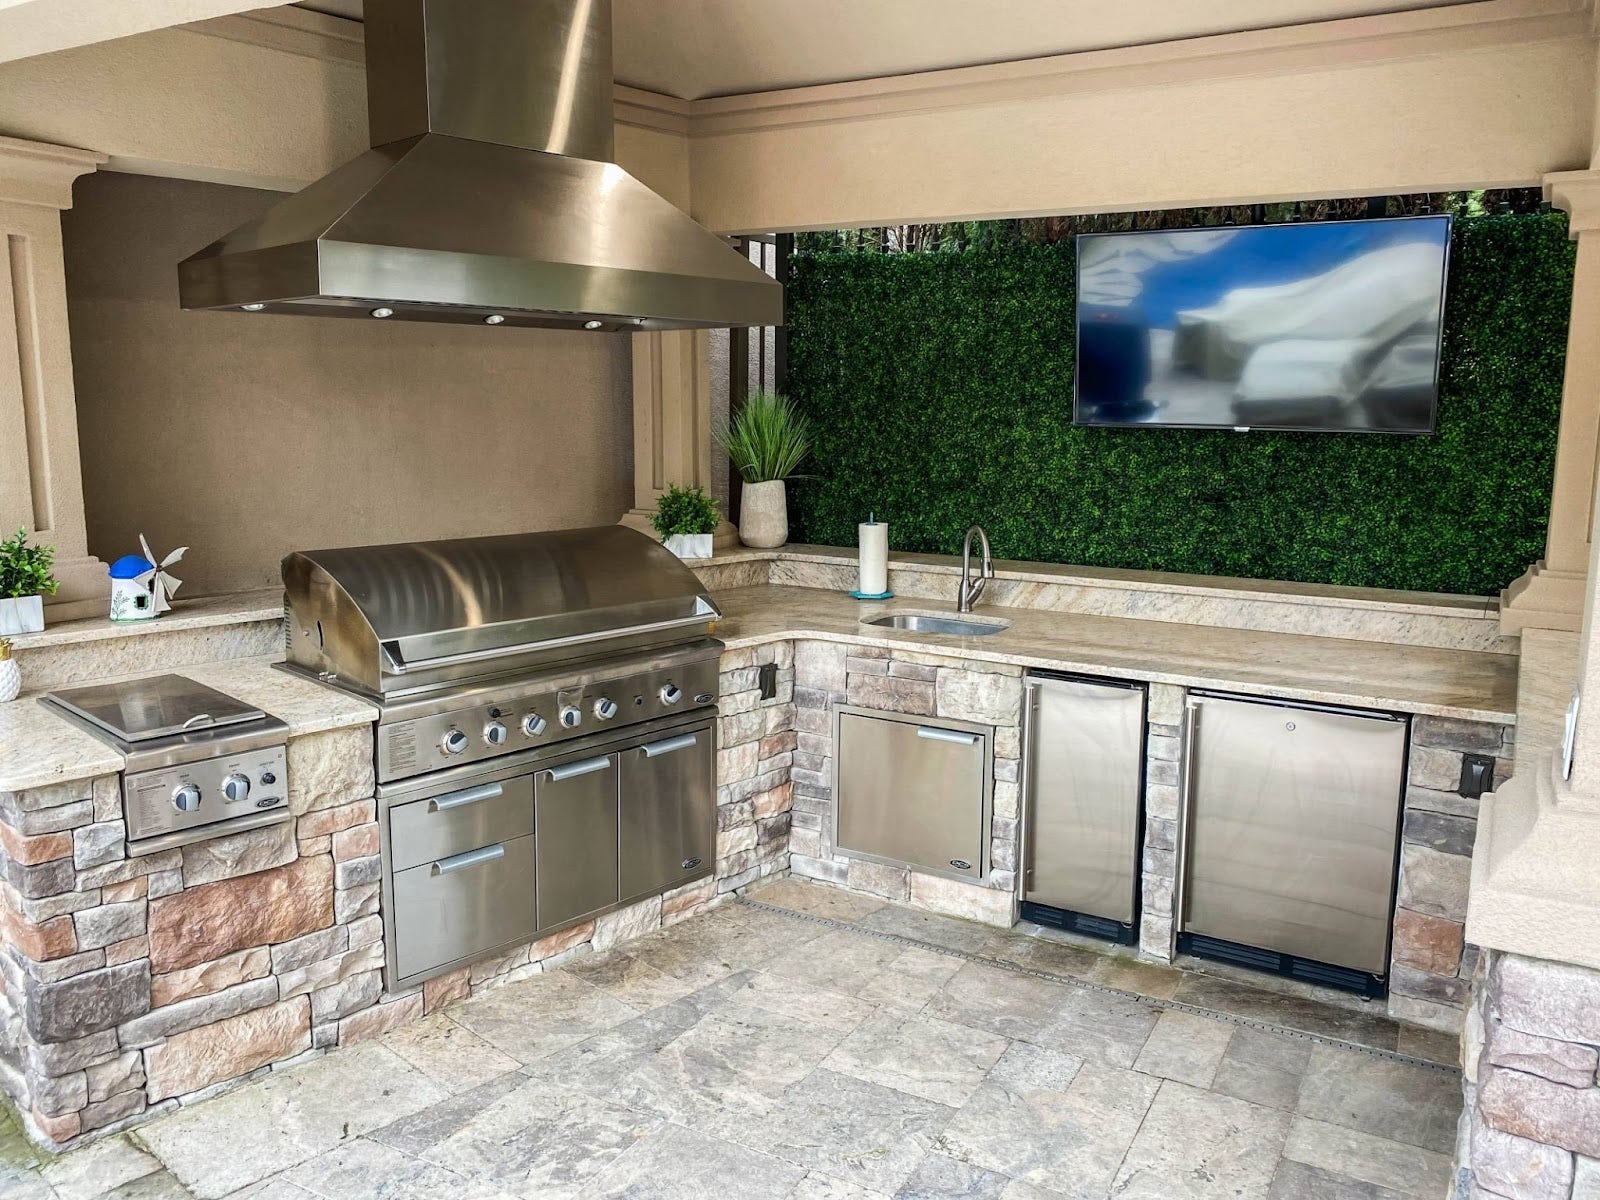 Smokeless Outdoor Kitchen: Proline ProVI hood keeps the air clear for entertaining in this stylish outdoor kitchen. Stone counters and a verdant view create a sophisticated space for grilling and socializing. - Proline Range Hoods - prolinerangehoods.com 